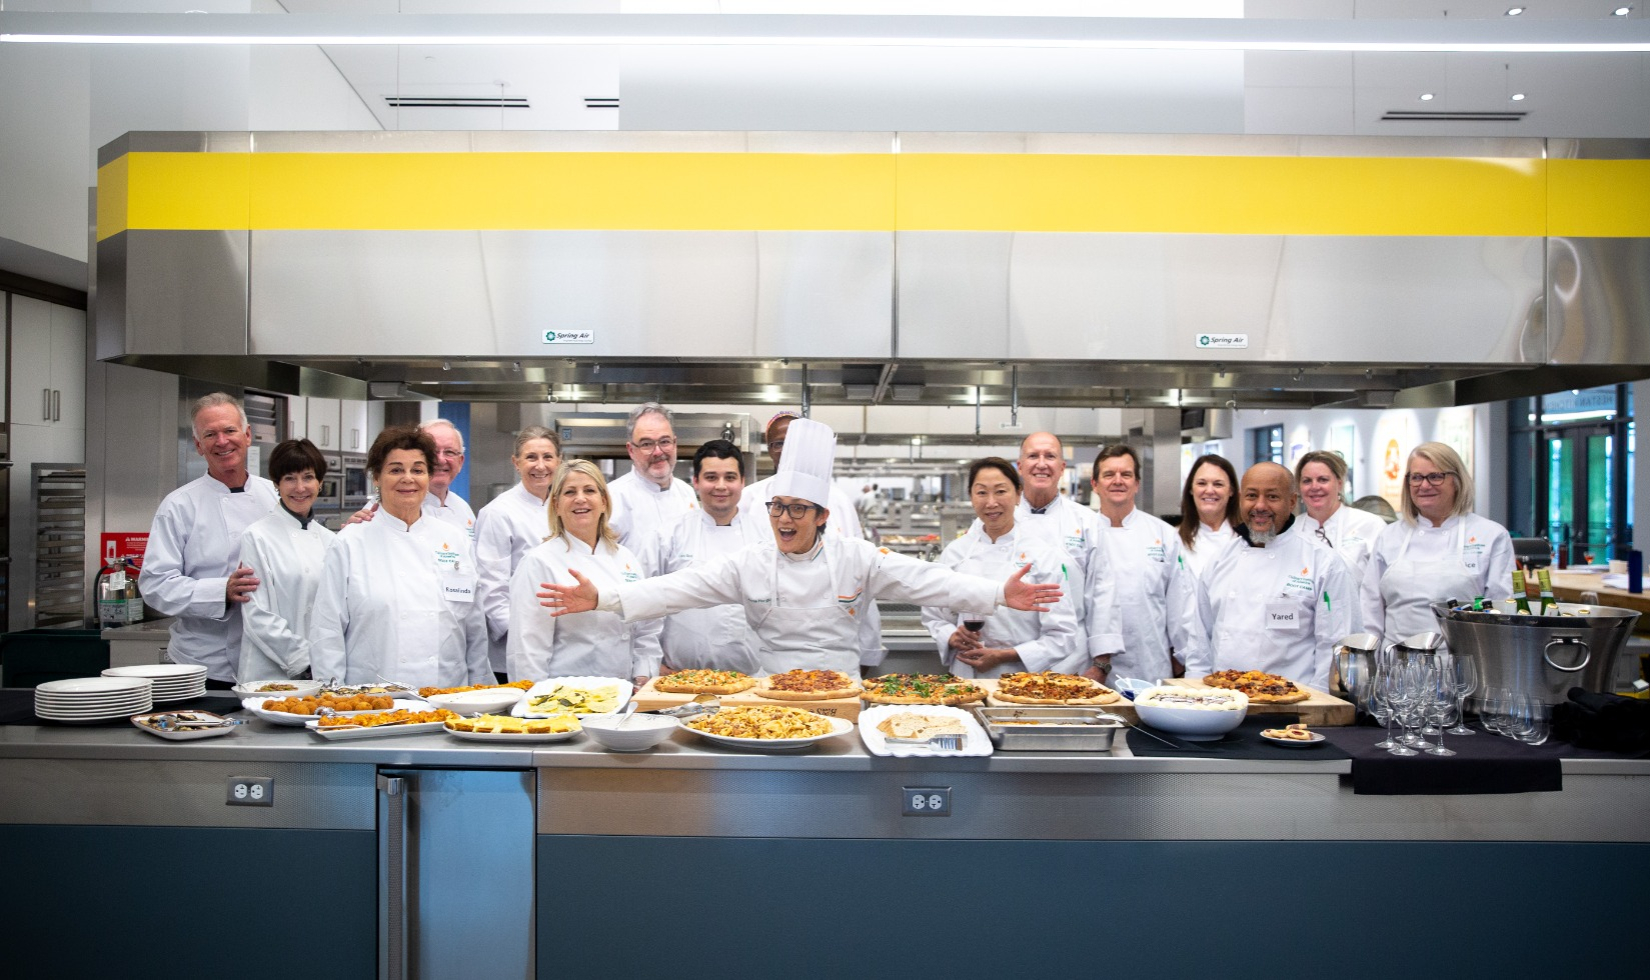 Group cooking class in commercial kitchen with everyone in white uniforms. 